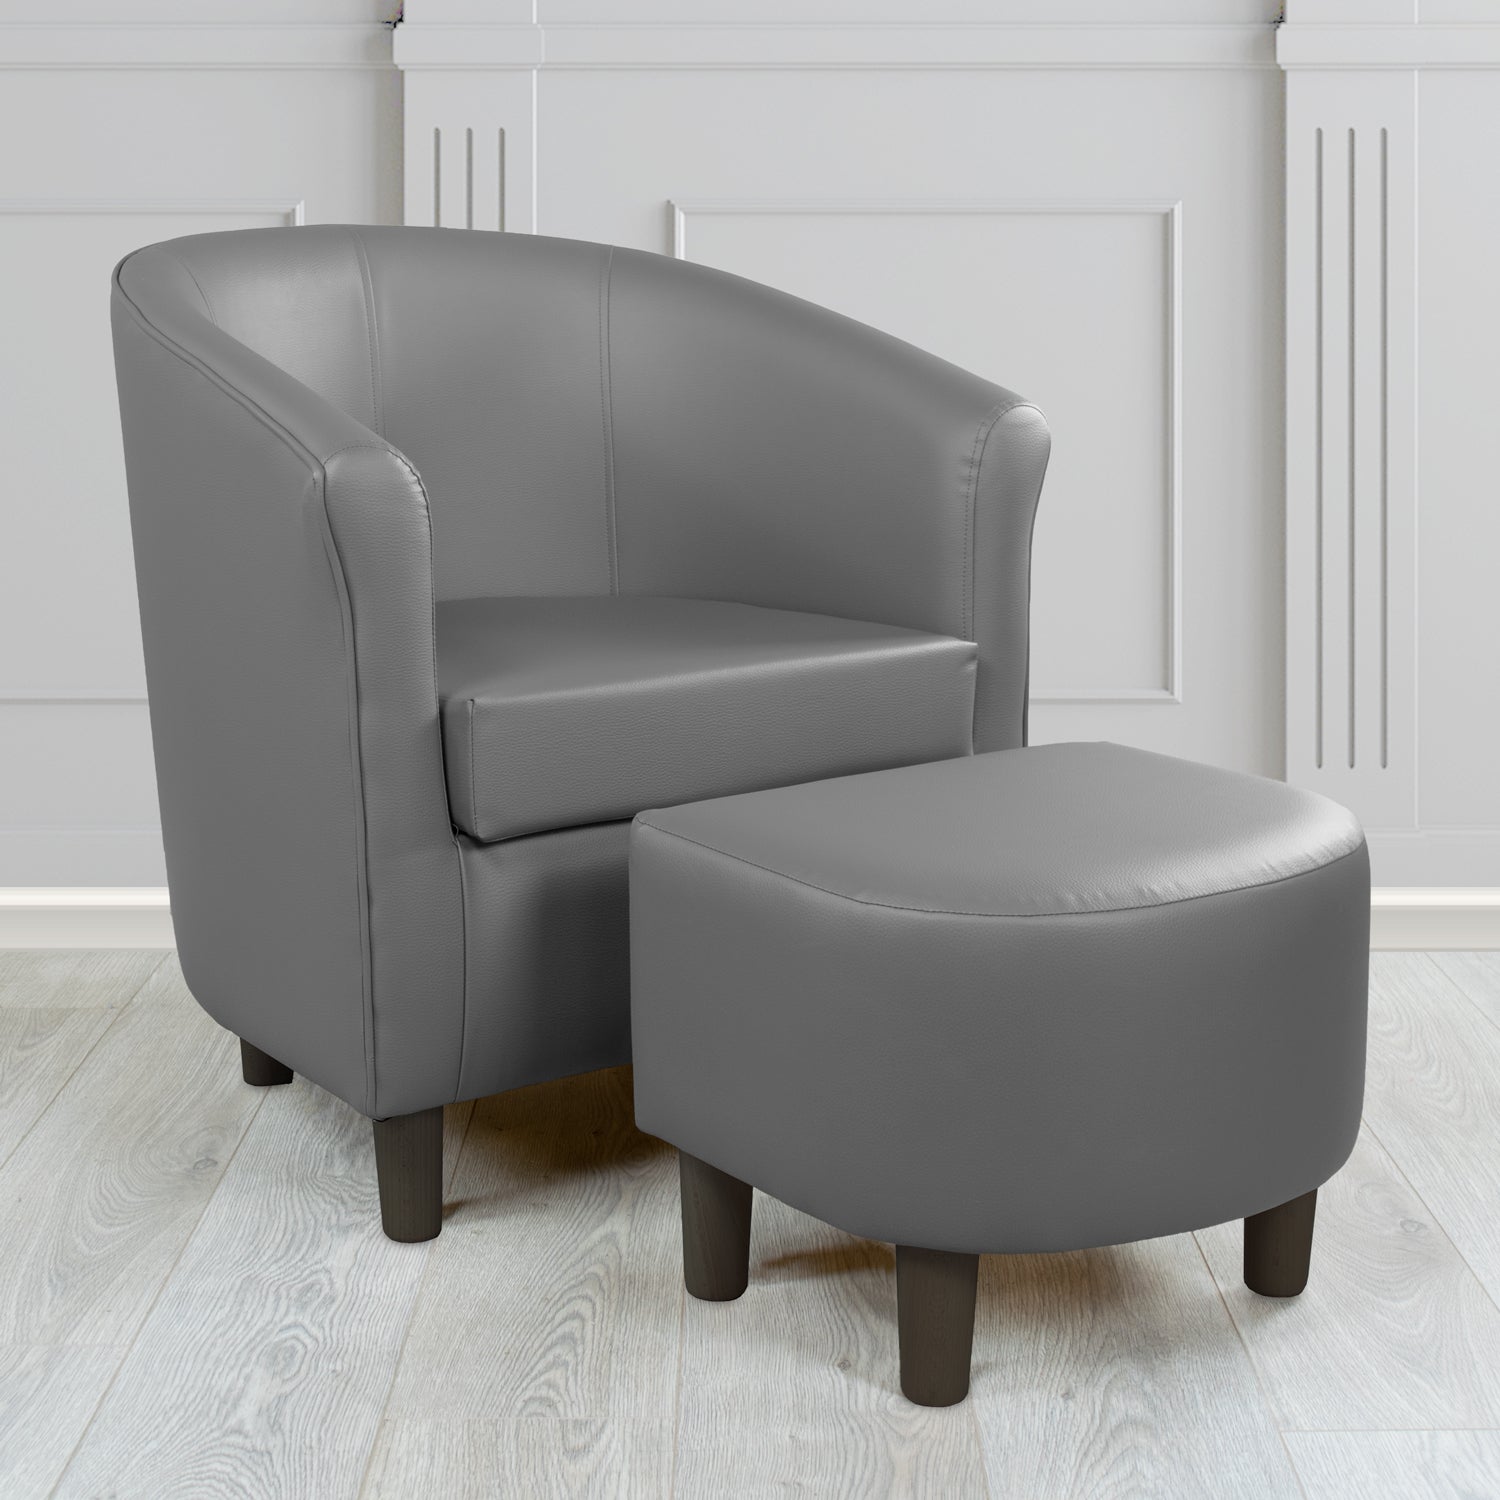 Express Tuscany Grey DSZ Faux Leather Tub Chair with Footstool Set (6541302005802)